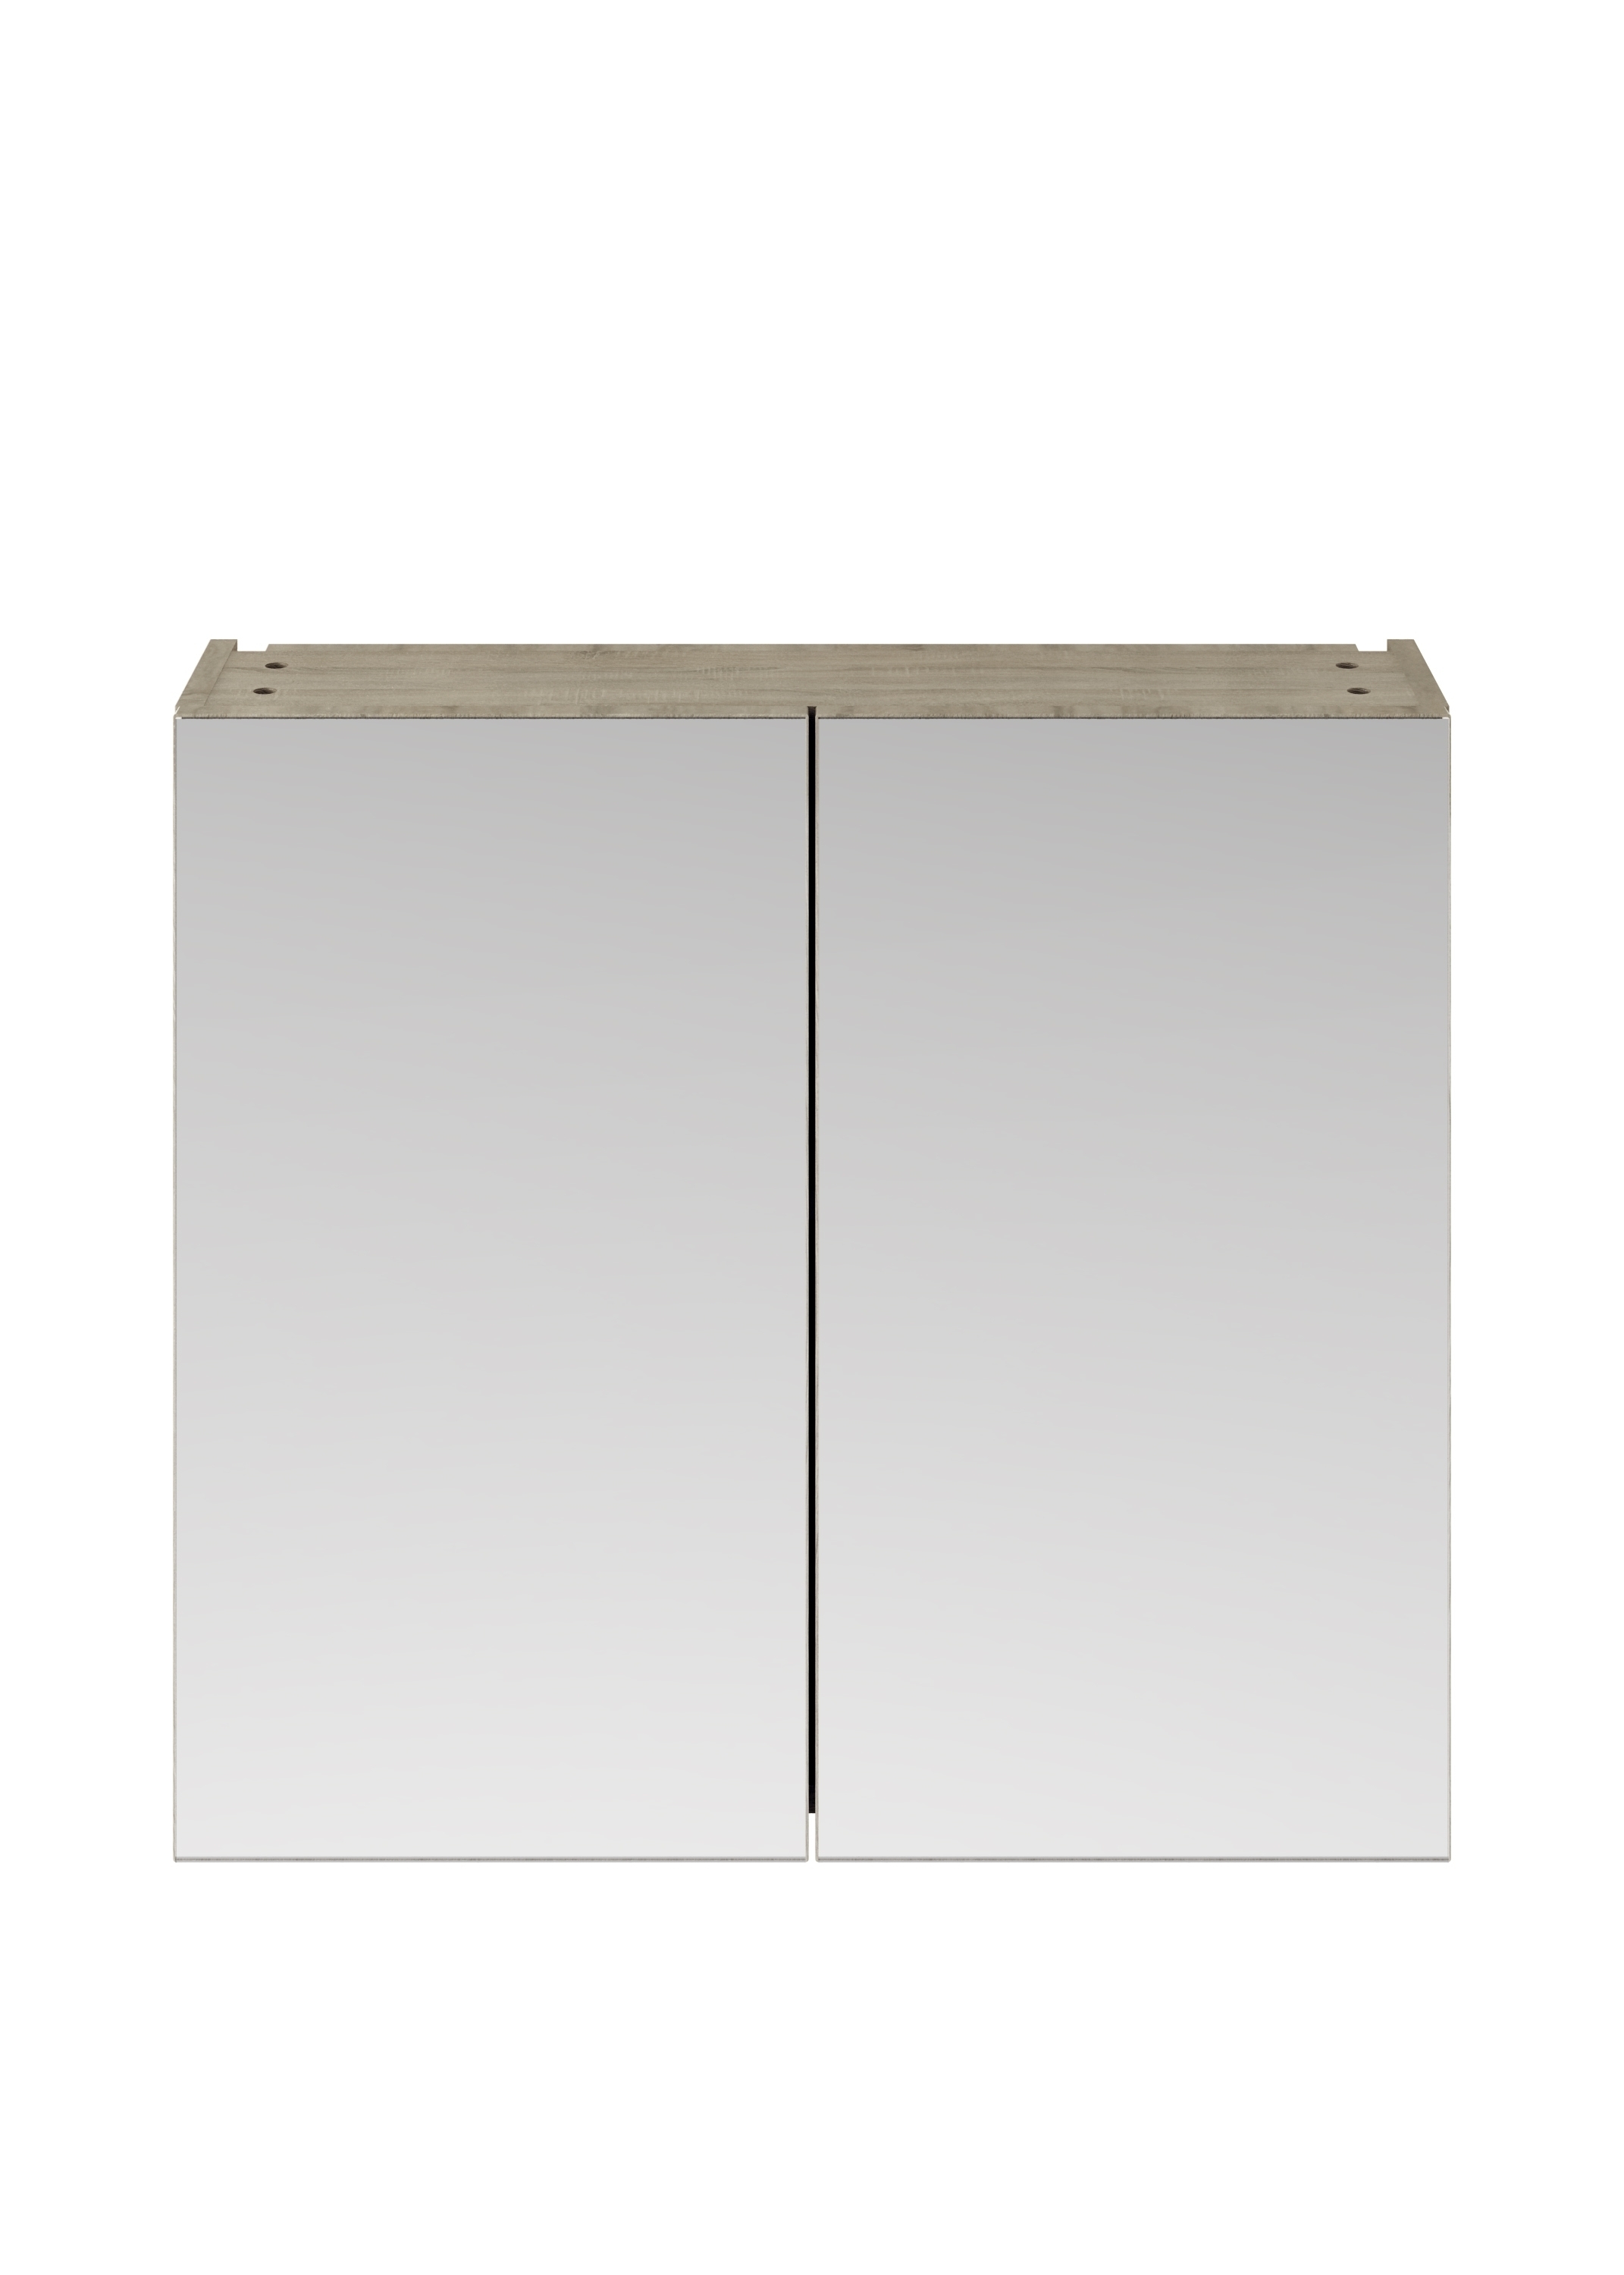 Nuie Athena (50/50) Mirrored Cabinet  800mm Wide - Driftwood - OFF219 